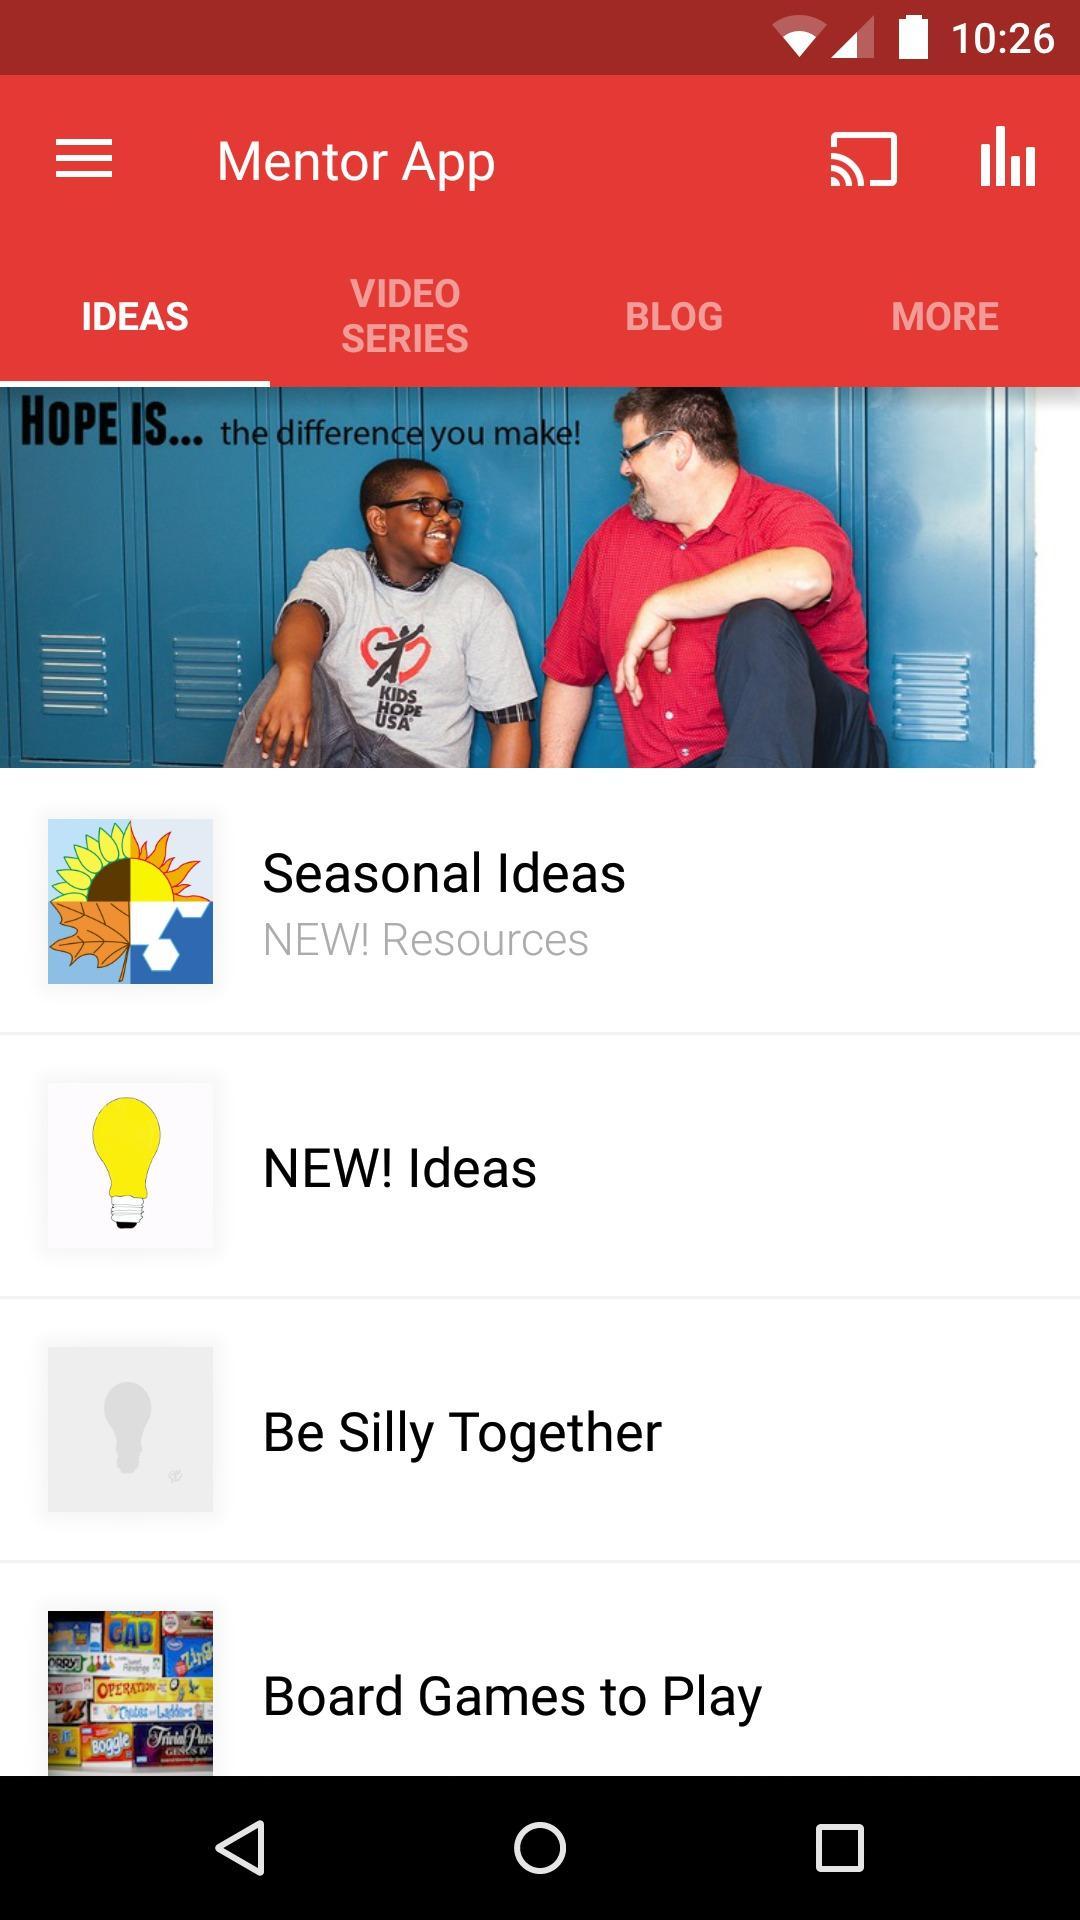 Mentor App for Android - APK Download